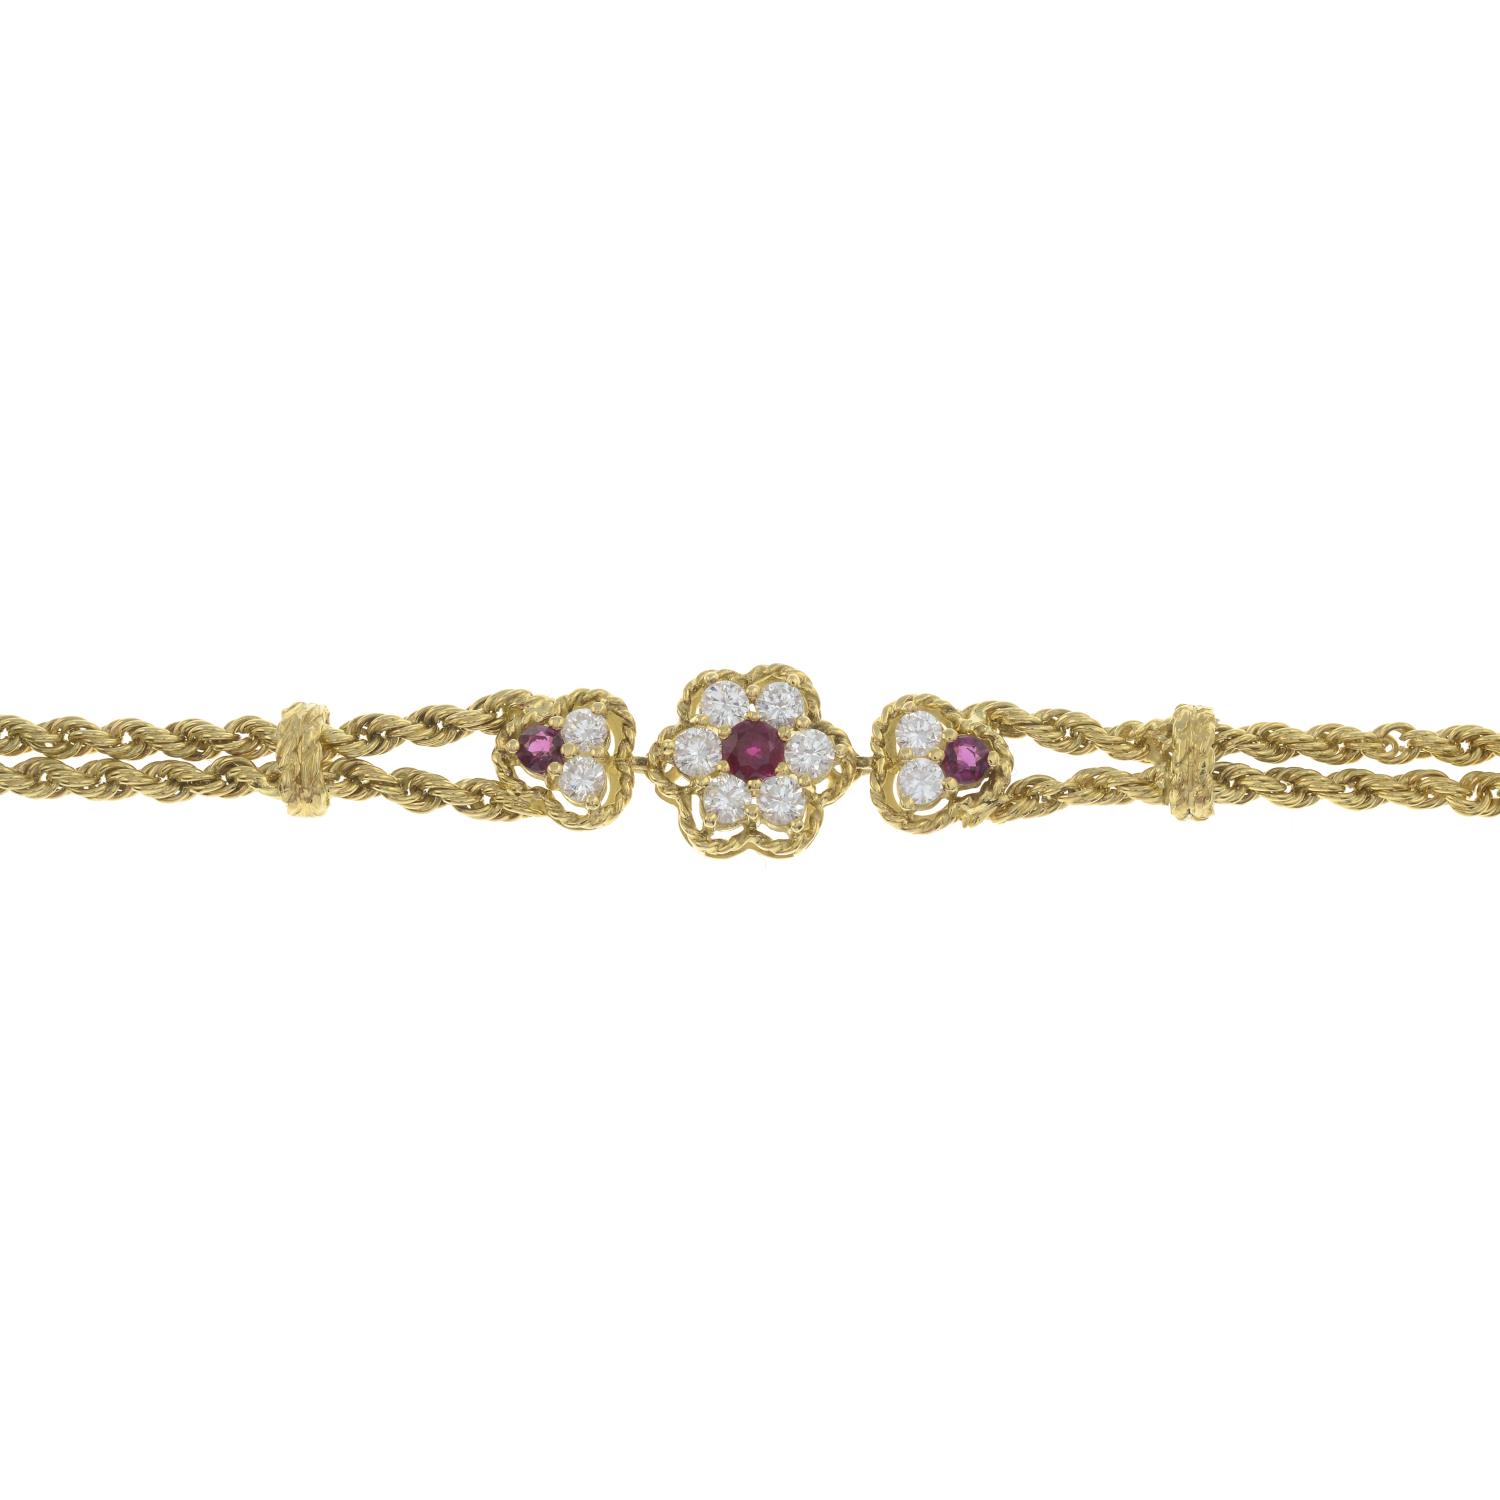 A ruby and diamond floral bracelet, by Piaget. - Image 2 of 4